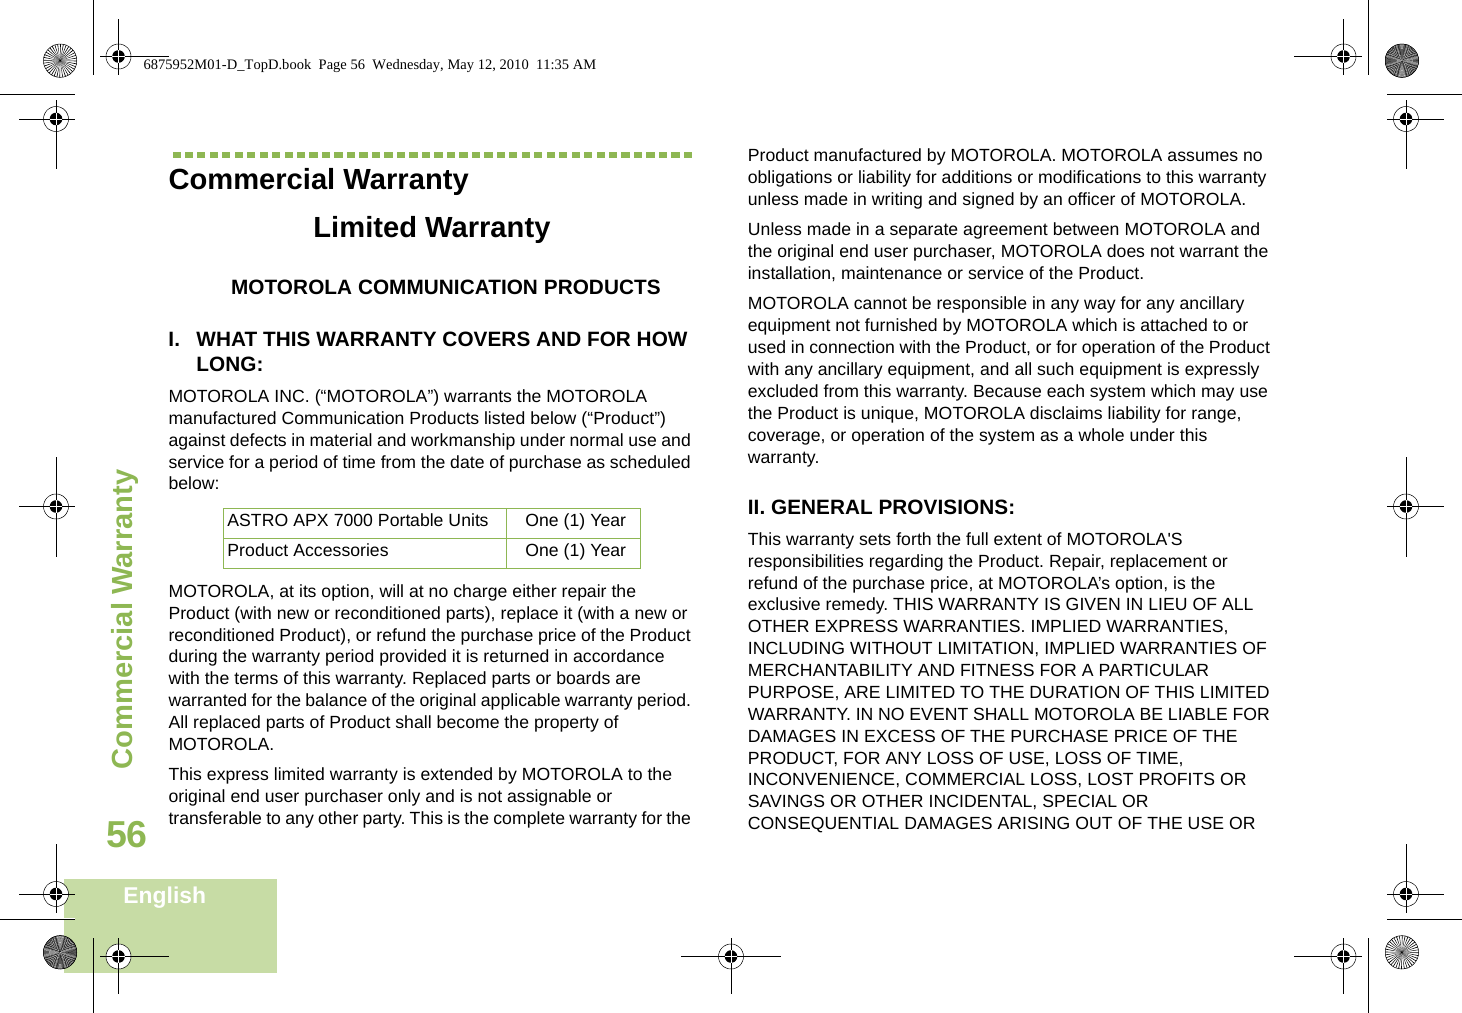 Commercial WarrantyEnglish56Commercial WarrantyLimited WarrantyMOTOROLA COMMUNICATION PRODUCTSI. WHAT THIS WARRANTY COVERS AND FOR HOW LONG:MOTOROLA INC. (“MOTOROLA”) warrants the MOTOROLA manufactured Communication Products listed below (“Product”) against defects in material and workmanship under normal use and service for a period of time from the date of purchase as scheduled below:MOTOROLA, at its option, will at no charge either repair the Product (with new or reconditioned parts), replace it (with a new or reconditioned Product), or refund the purchase price of the Product during the warranty period provided it is returned in accordance with the terms of this warranty. Replaced parts or boards are warranted for the balance of the original applicable warranty period. All replaced parts of Product shall become the property of MOTOROLA.This express limited warranty is extended by MOTOROLA to the original end user purchaser only and is not assignable or transferable to any other party. This is the complete warranty for the Product manufactured by MOTOROLA. MOTOROLA assumes no obligations or liability for additions or modifications to this warranty unless made in writing and signed by an officer of MOTOROLA. Unless made in a separate agreement between MOTOROLA and the original end user purchaser, MOTOROLA does not warrant the installation, maintenance or service of the Product.MOTOROLA cannot be responsible in any way for any ancillary equipment not furnished by MOTOROLA which is attached to or used in connection with the Product, or for operation of the Product with any ancillary equipment, and all such equipment is expressly excluded from this warranty. Because each system which may use the Product is unique, MOTOROLA disclaims liability for range, coverage, or operation of the system as a whole under this warranty.II. GENERAL PROVISIONS:This warranty sets forth the full extent of MOTOROLA&apos;S responsibilities regarding the Product. Repair, replacement or refund of the purchase price, at MOTOROLA’s option, is the exclusive remedy. THIS WARRANTY IS GIVEN IN LIEU OF ALL OTHER EXPRESS WARRANTIES. IMPLIED WARRANTIES, INCLUDING WITHOUT LIMITATION, IMPLIED WARRANTIES OF MERCHANTABILITY AND FITNESS FOR A PARTICULAR PURPOSE, ARE LIMITED TO THE DURATION OF THIS LIMITED WARRANTY. IN NO EVENT SHALL MOTOROLA BE LIABLE FOR DAMAGES IN EXCESS OF THE PURCHASE PRICE OF THE PRODUCT, FOR ANY LOSS OF USE, LOSS OF TIME, INCONVENIENCE, COMMERCIAL LOSS, LOST PROFITS OR SAVINGS OR OTHER INCIDENTAL, SPECIAL OR CONSEQUENTIAL DAMAGES ARISING OUT OF THE USE OR ASTRO APX 7000 Portable Units One (1) YearProduct Accessories One (1) Year6875952M01-D_TopD.book  Page 56  Wednesday, May 12, 2010  11:35 AM